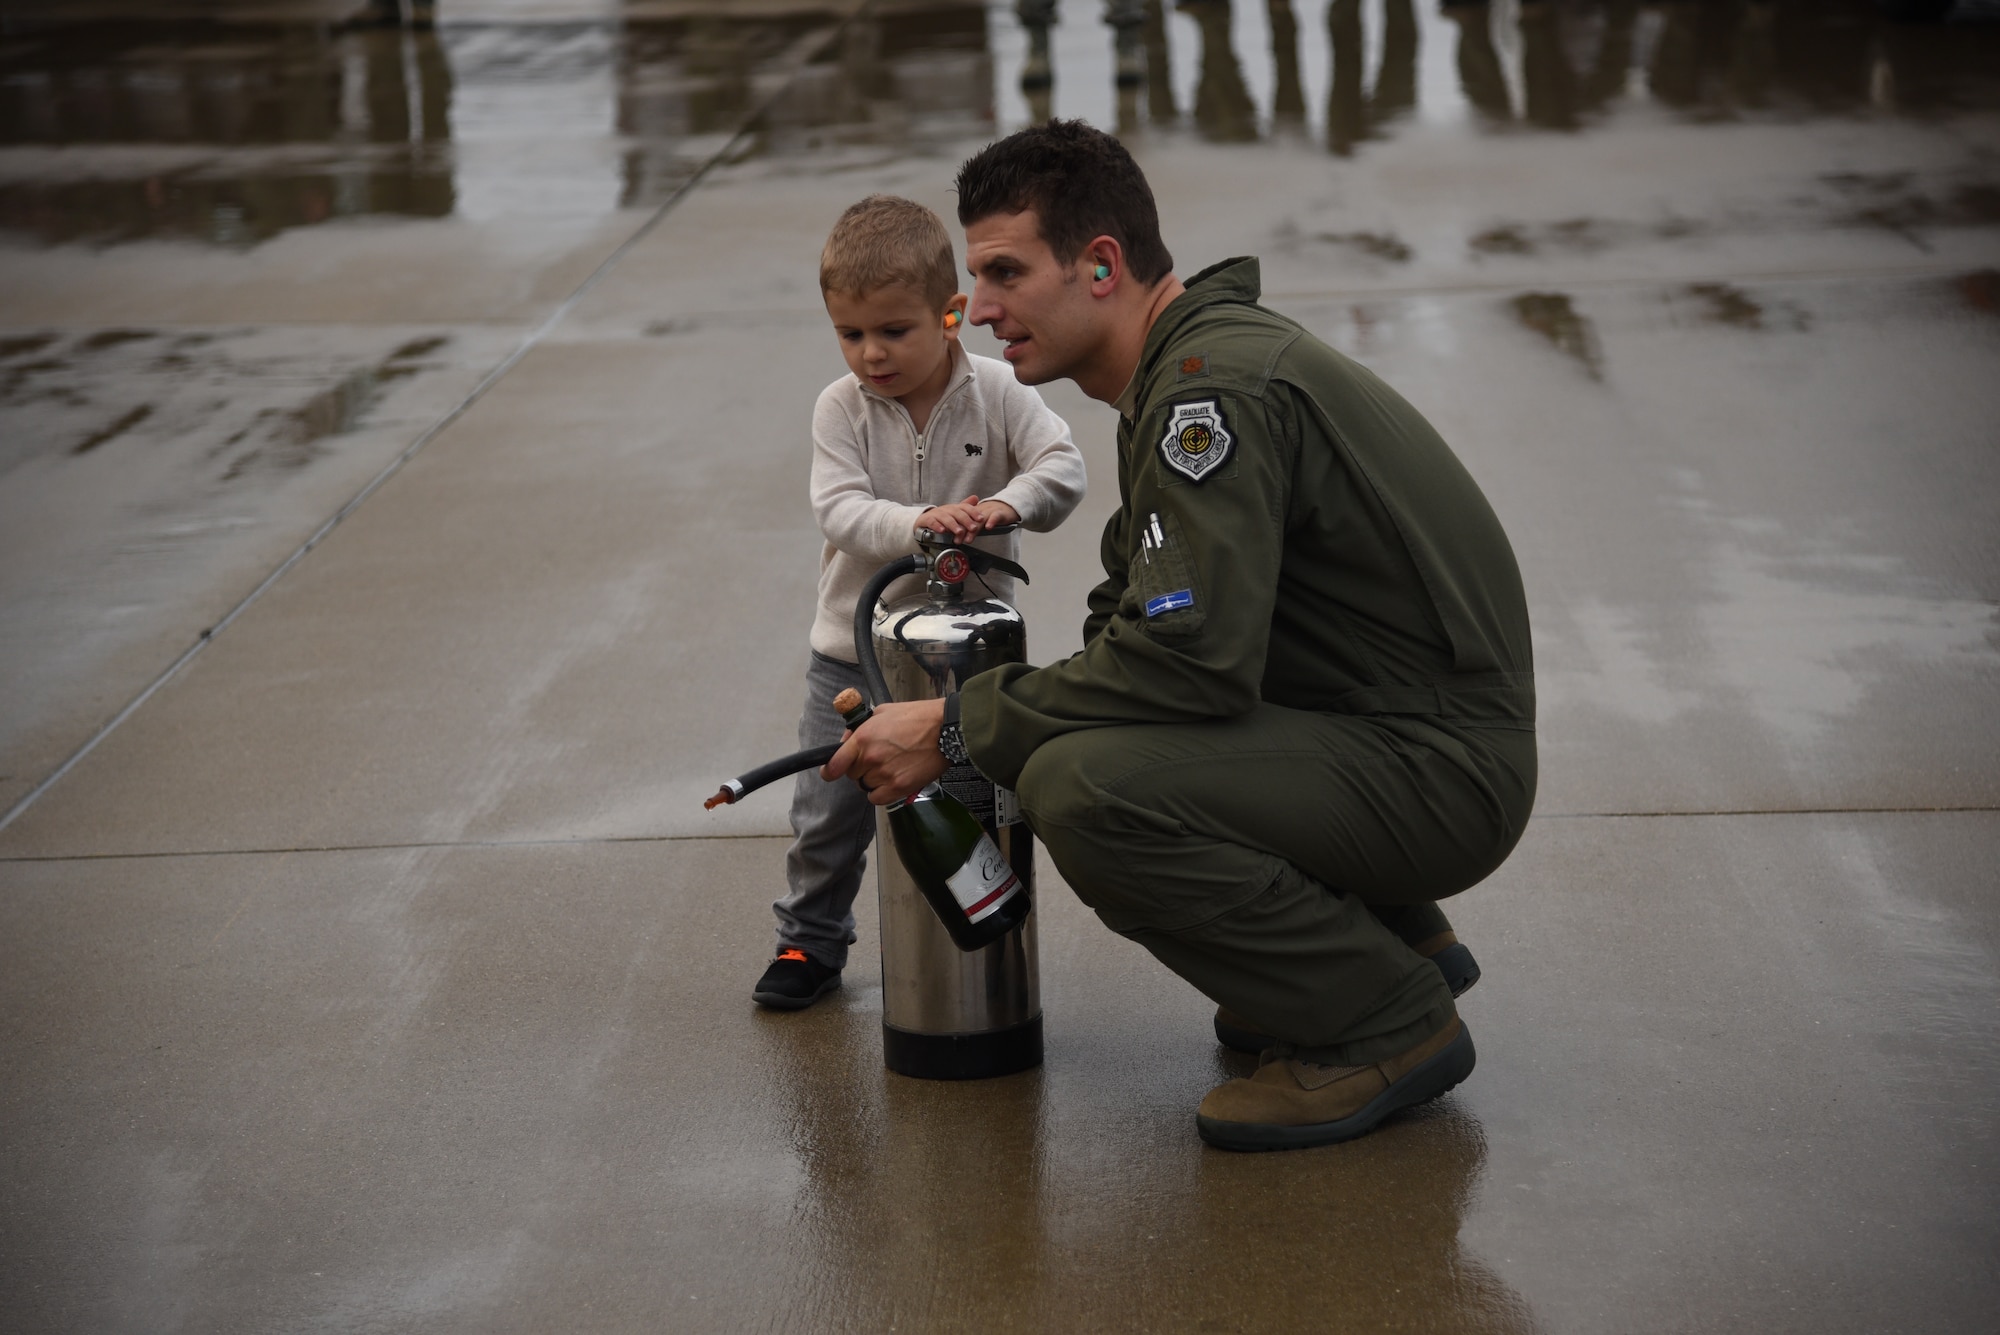 U.S. Air Force Maj. Kiel Gilliland waits with his son, Garrett below a KC-135R Stratotanker piloted by his wife, U.S. Air Force Maj. Sharon Gilliland at Joint Base Mcguire-Dix-Lakehurst on Nov, 5 2015. Sharon Gilliland’s mid-air refueling was specially coordinated between her Air National Guard and his Air Force Reserve units to celebrate her final flight, also called a “fini flight” aboard to KC-135. Gilliland, a pilot for 12 years with the New Jersey Air National Guard’s 108th Wing is ceremonially hosed down by fellow pilots, crewmembers, friends and family as she leaves piloting to others and takes a non-flying job with the 514th AMOS, Air Force Reserve so she can devote more time to her family. During her time in the 108th Wing, Gilliland deployed three times and has 60 combat sorties to her credit. (U.S. Air National Guard photo by Master Sgt. Carl Clegg/Released)  